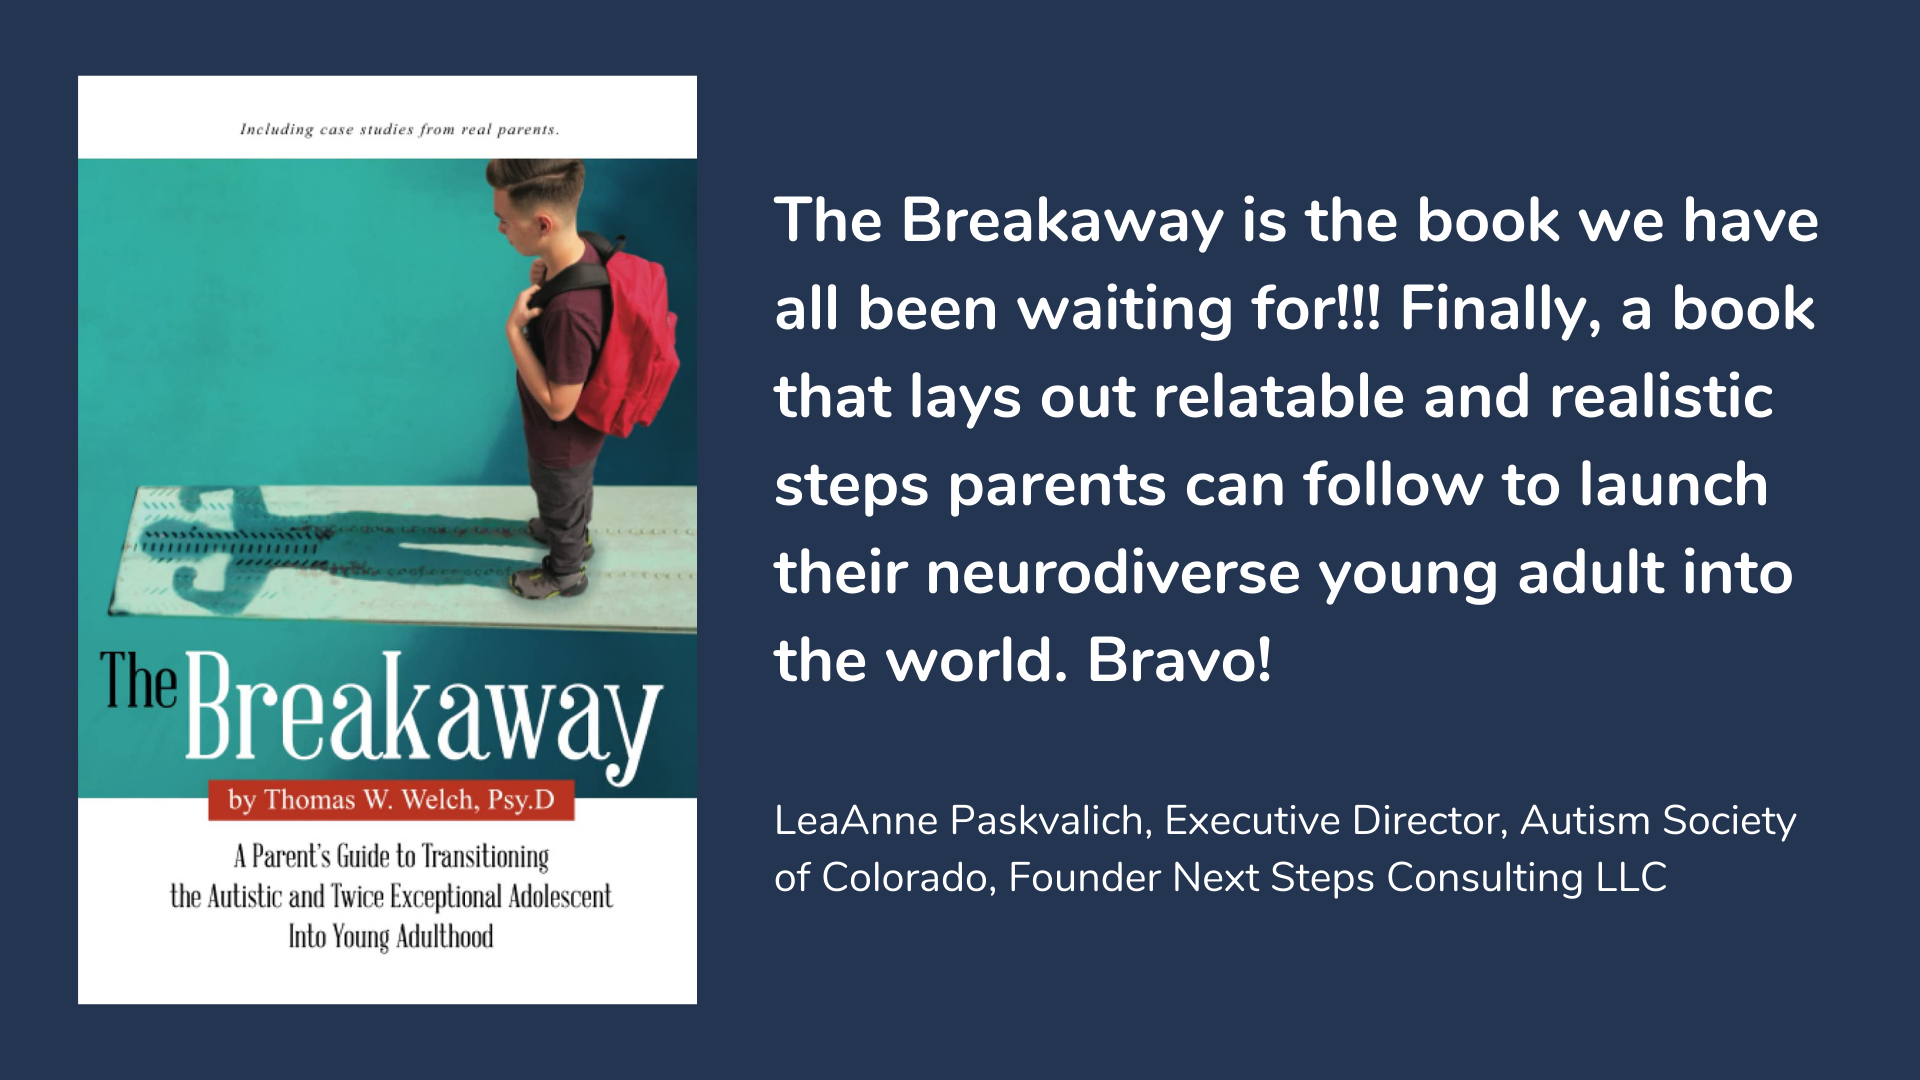 The Breakaway: A Parent's Guide to Transitioning the Autistic and Twice Exceptional Adolescent Into Young Adulthood, book cover and description.